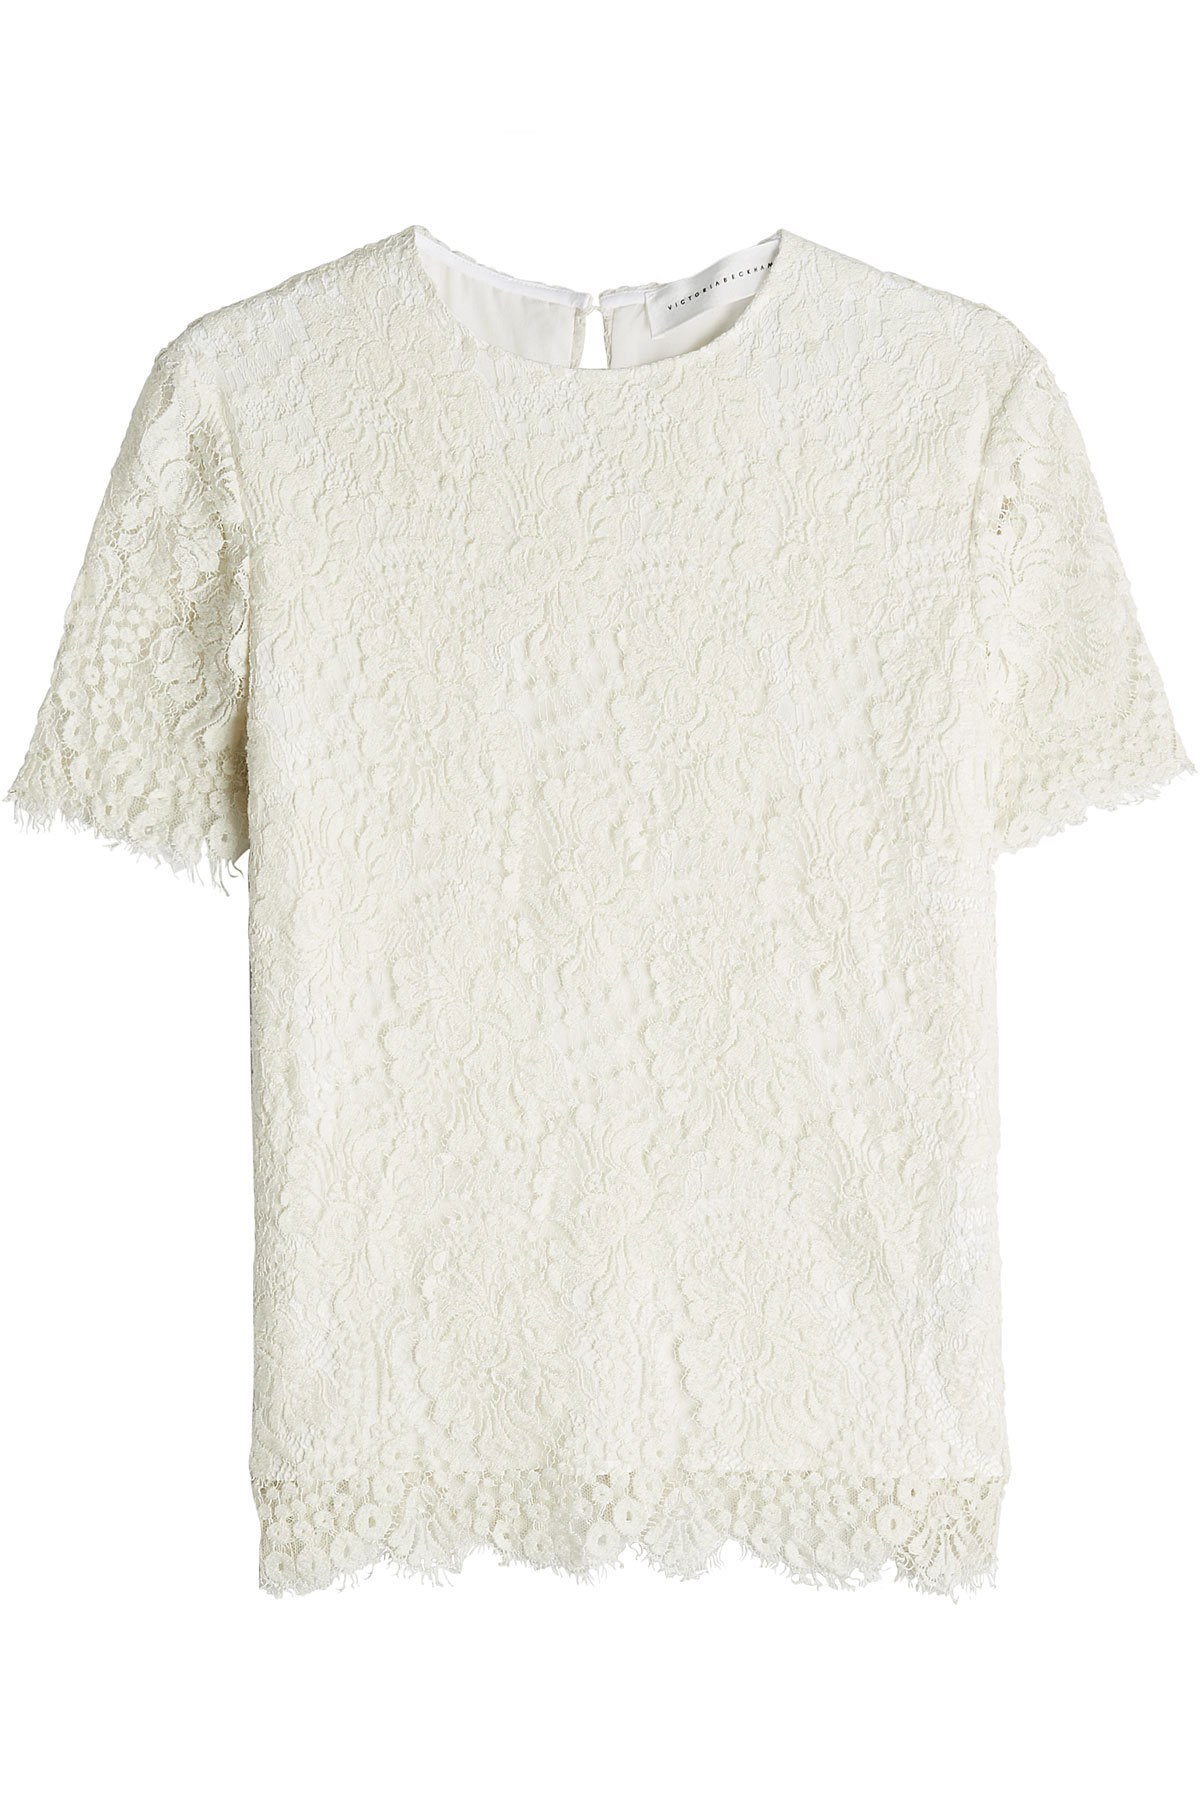 Victoria Beckham - Laced Silk and Wool-Blend Top